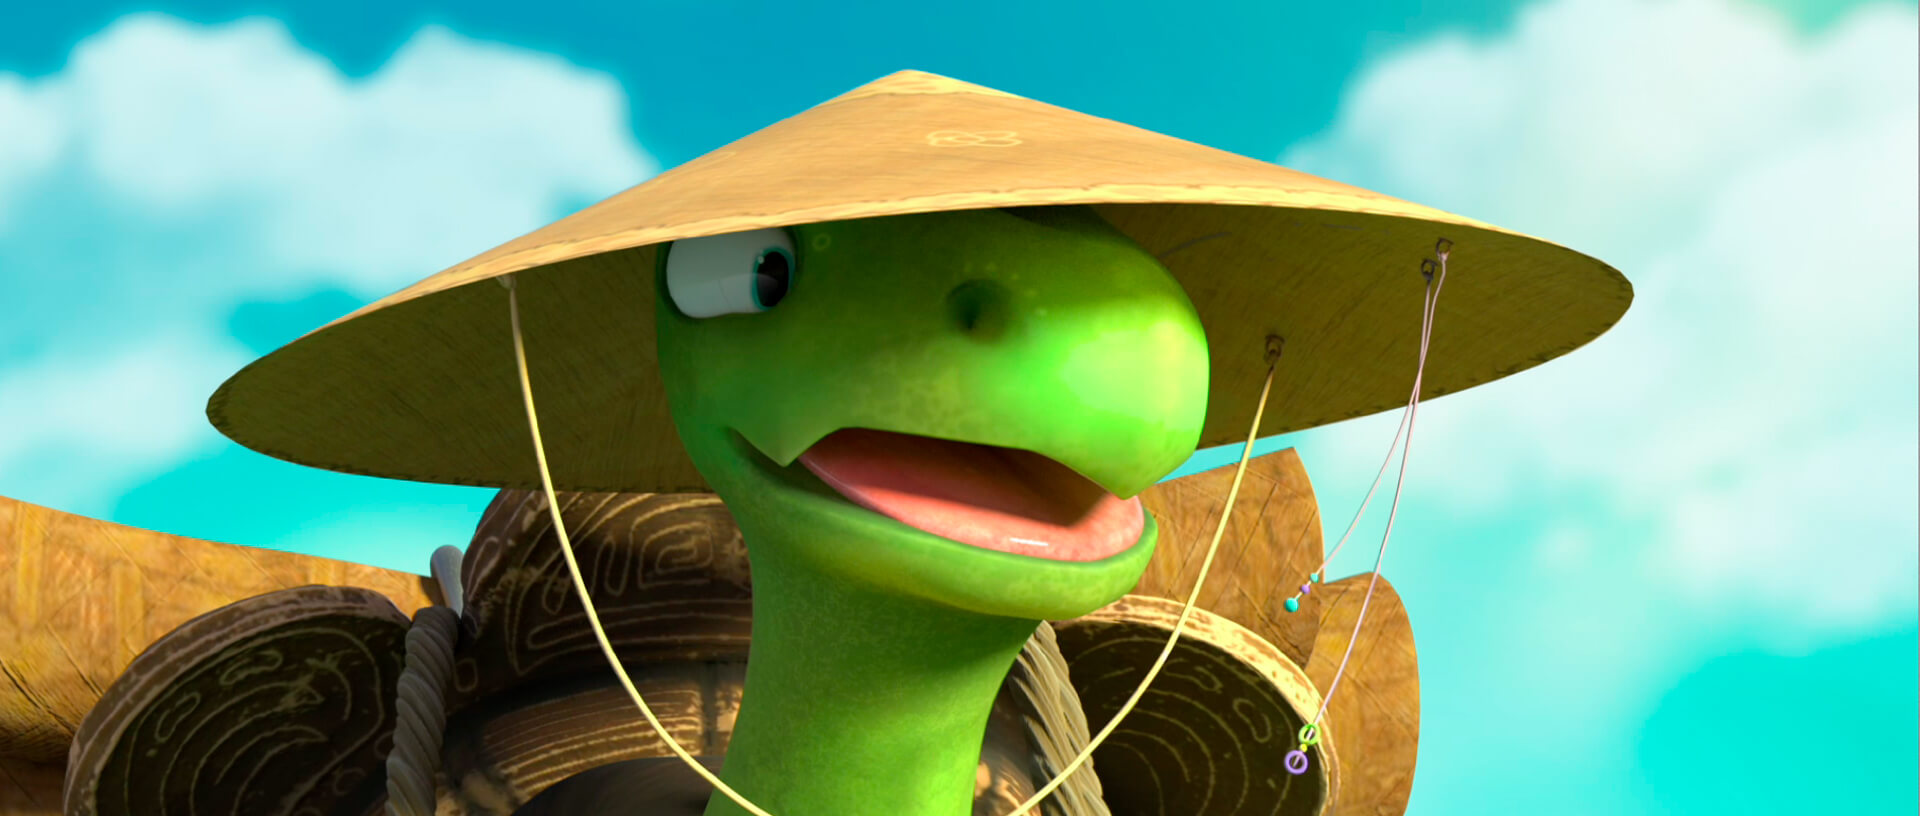 Close-up of smiling turtle character in a conical hat, against a blue sky with clouds.